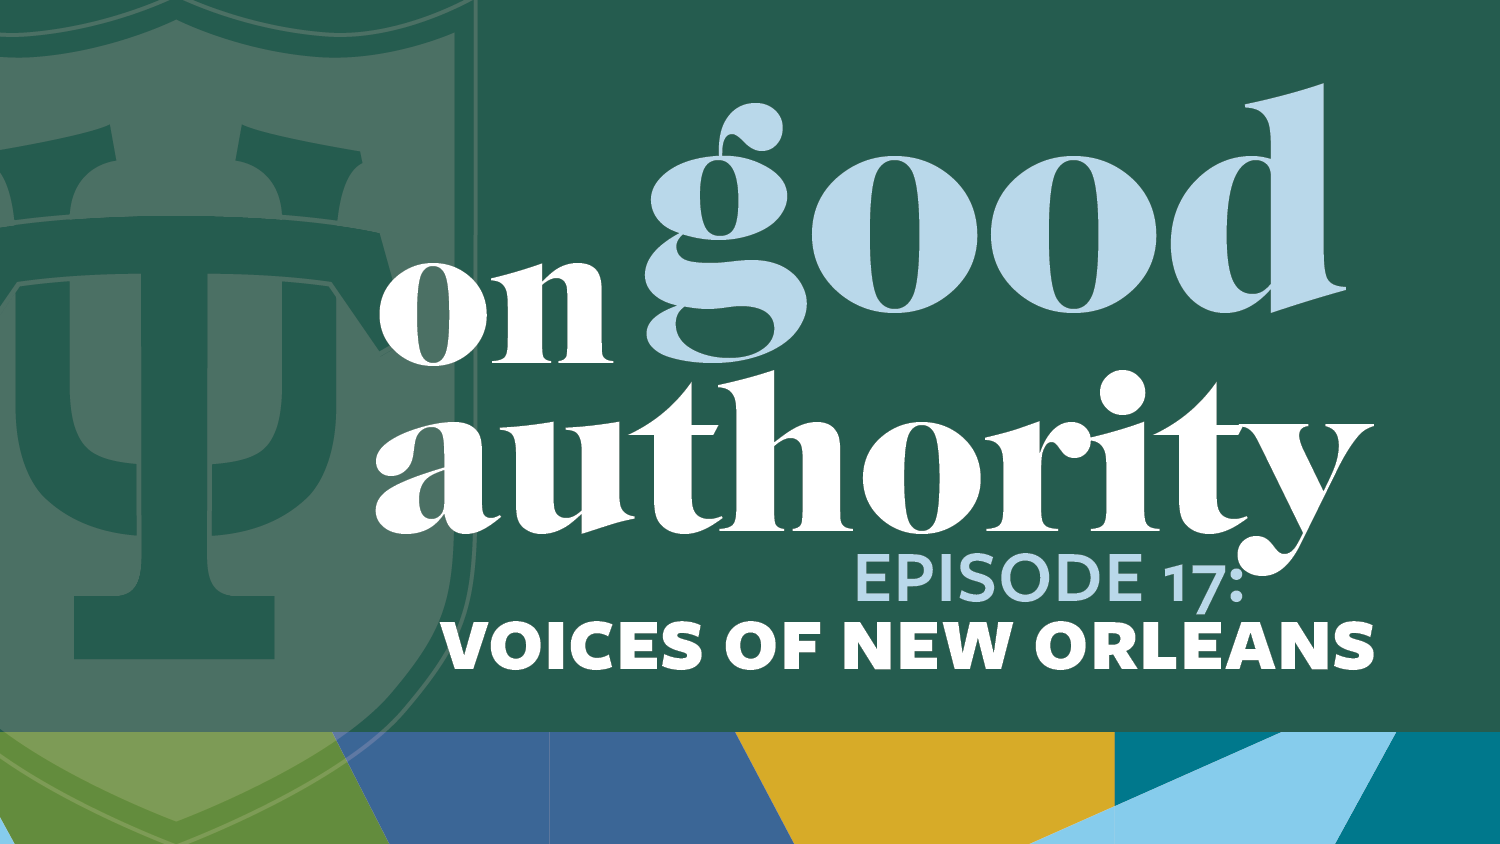 Episode 17: Food for Thought: Voices of New Orleans